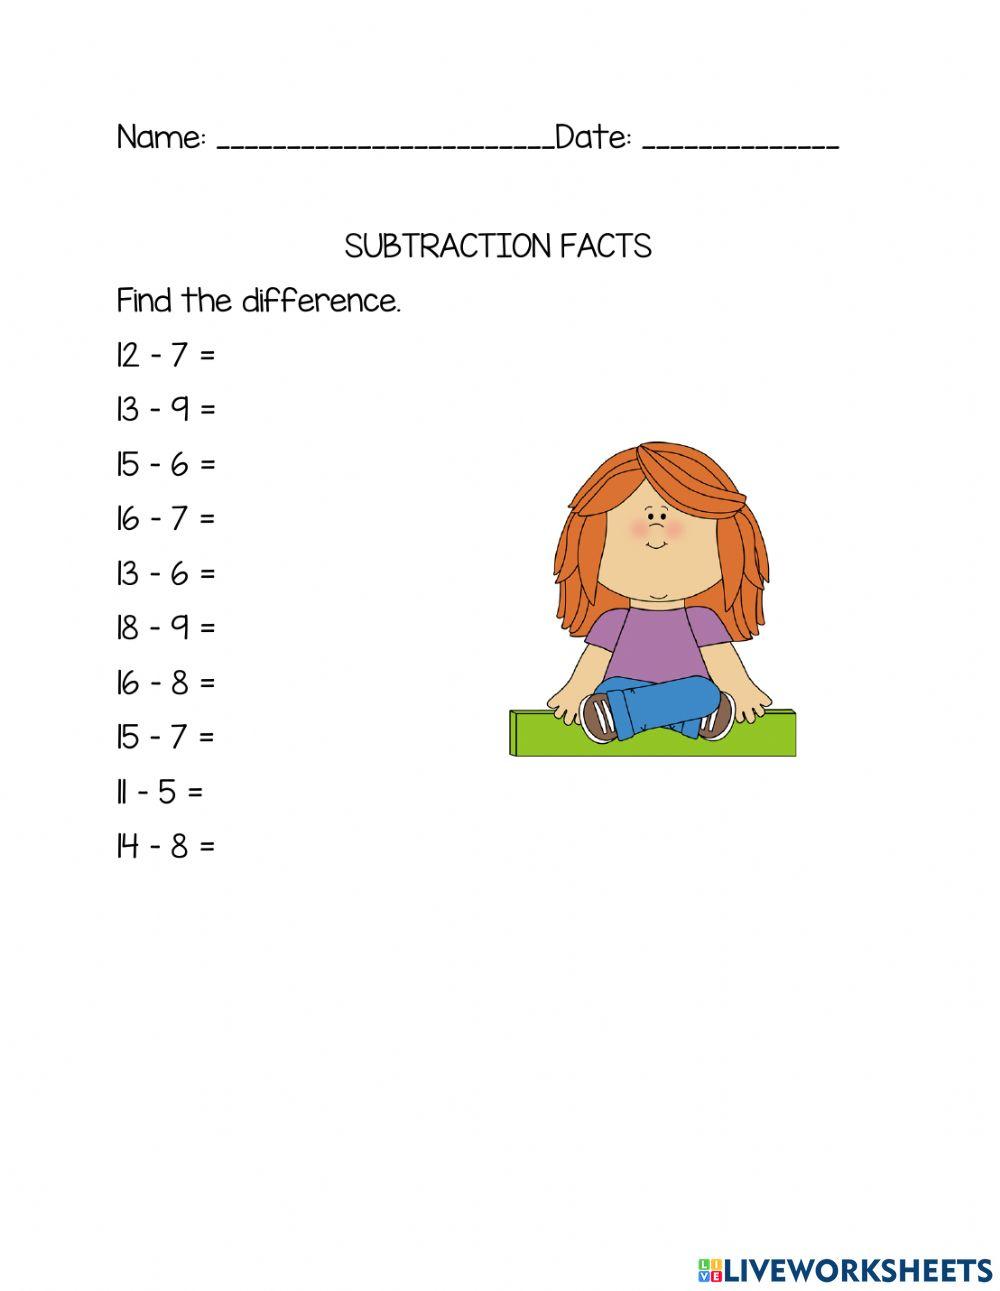 Subtraction facts